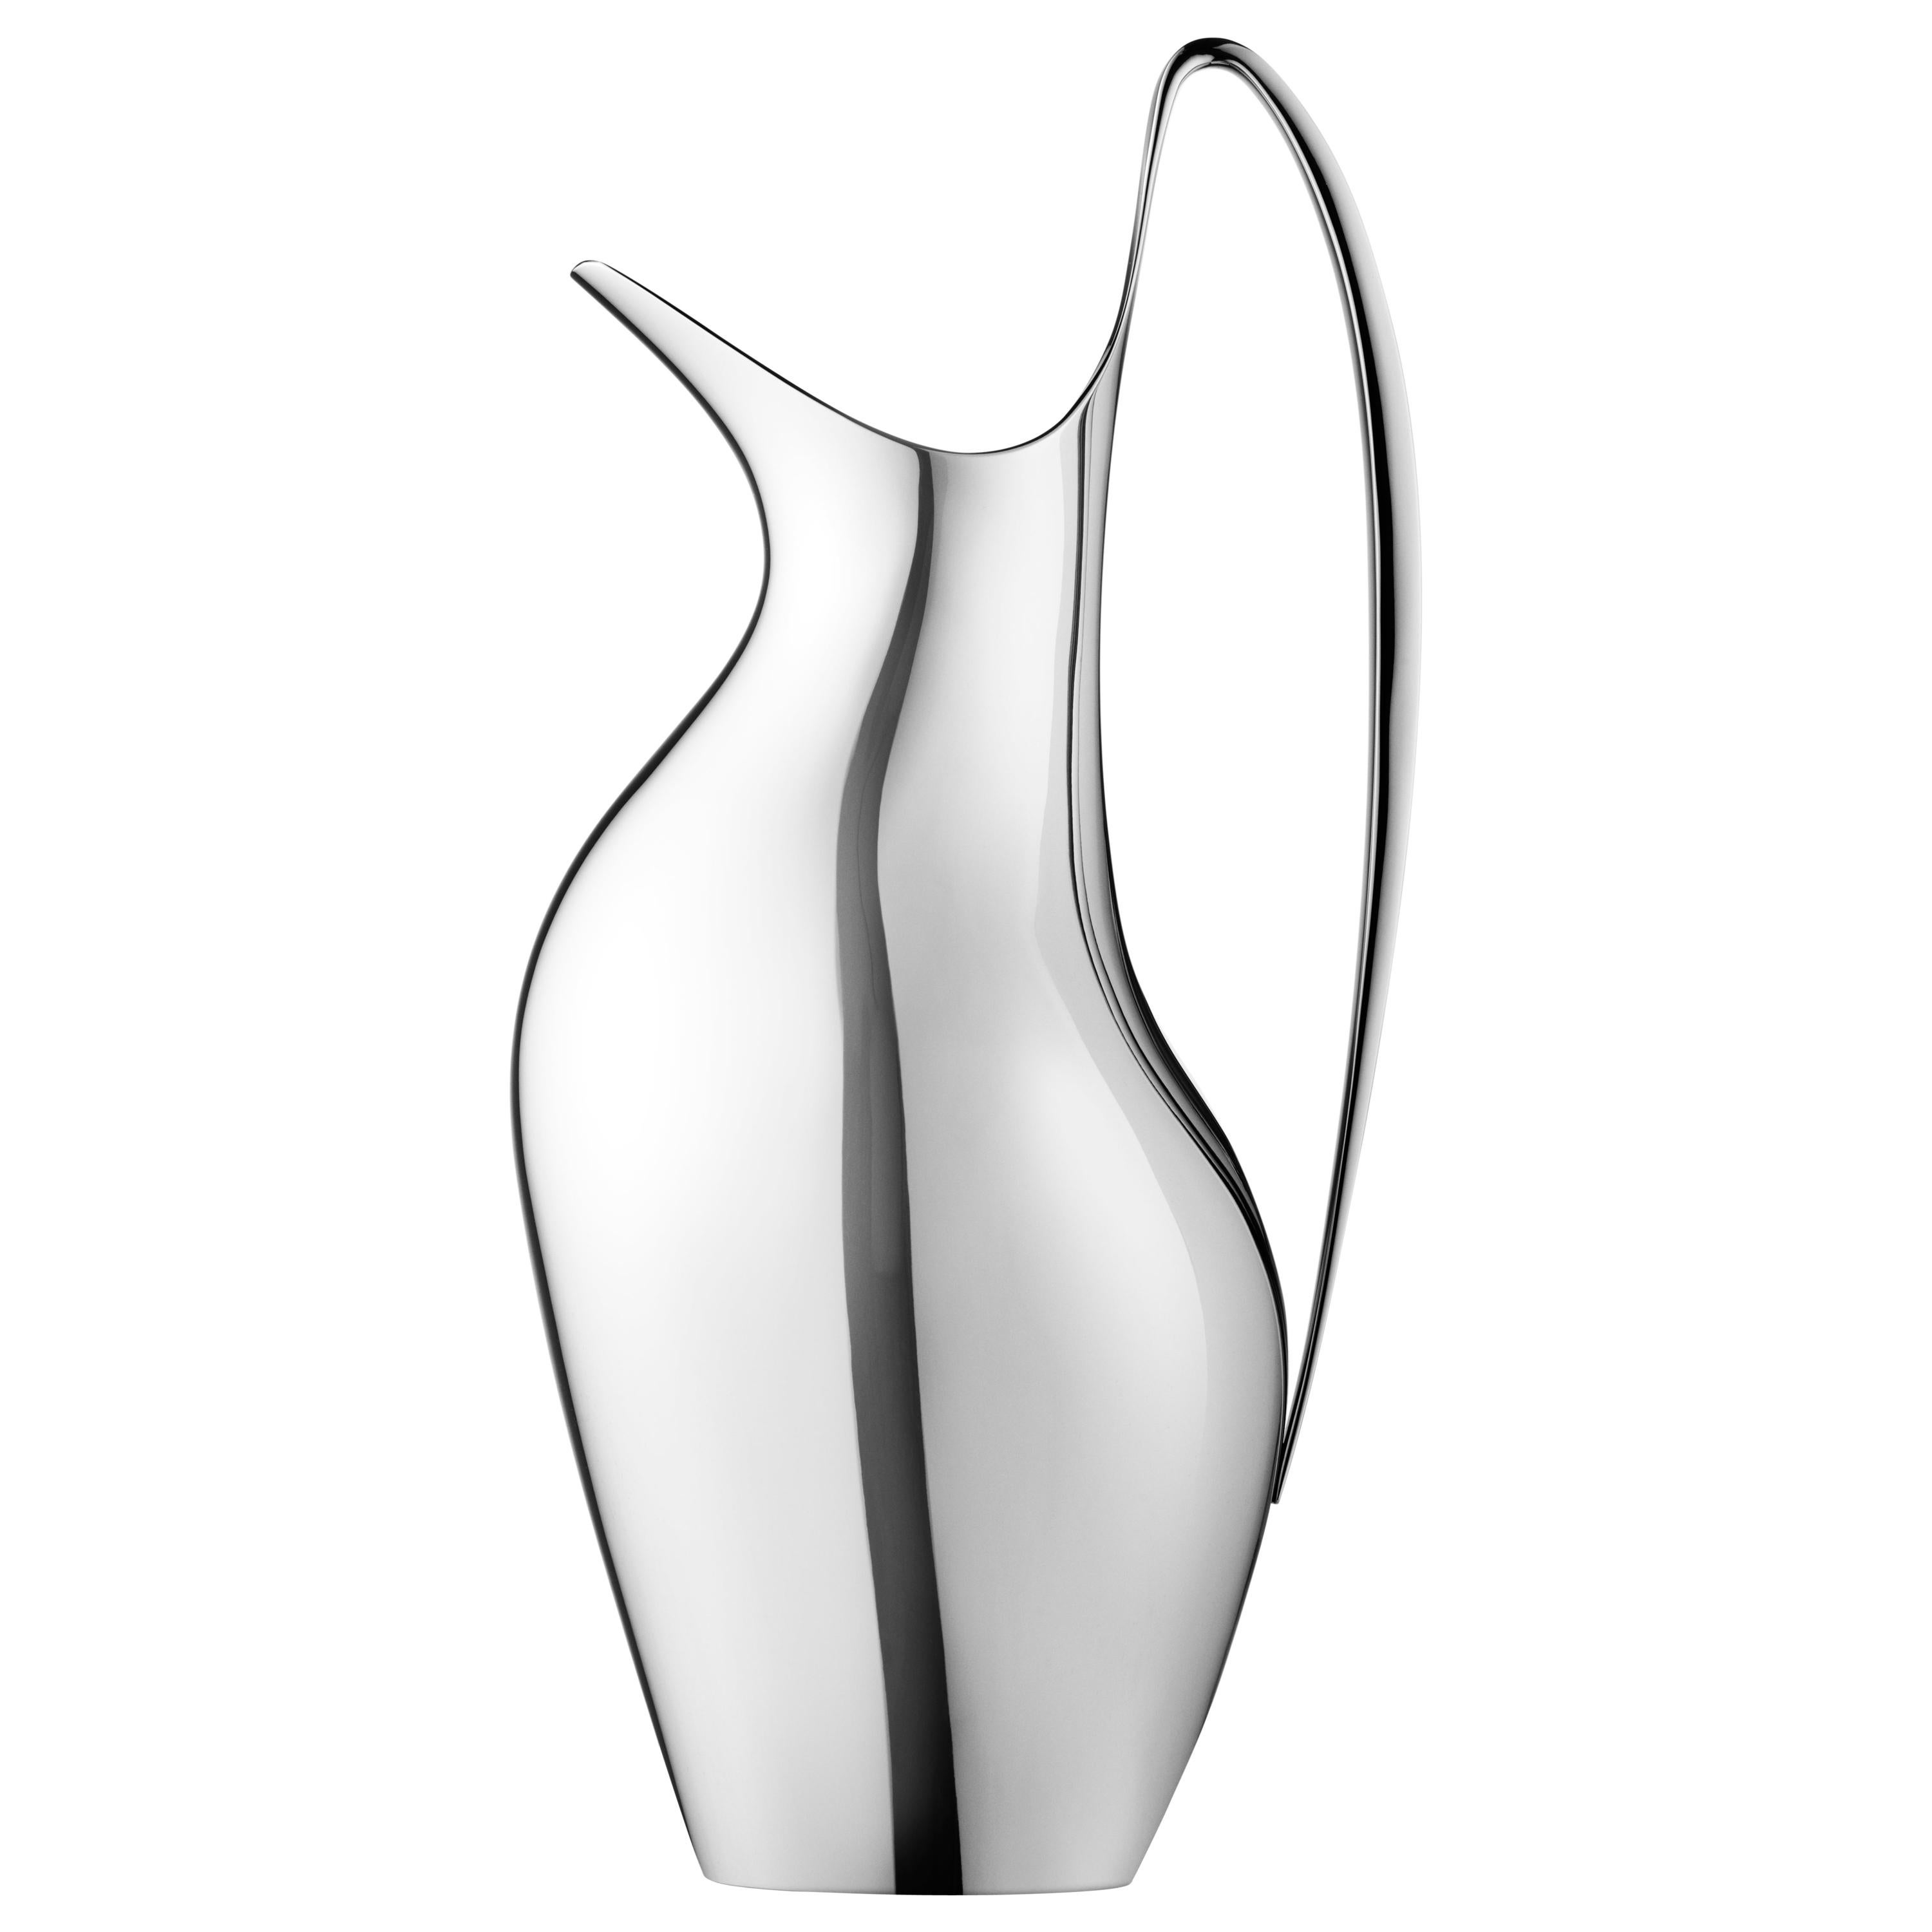 Georg Jensen HK Pitcher in Stainless Steel Mirror Finish by Henning Koppel For Sale